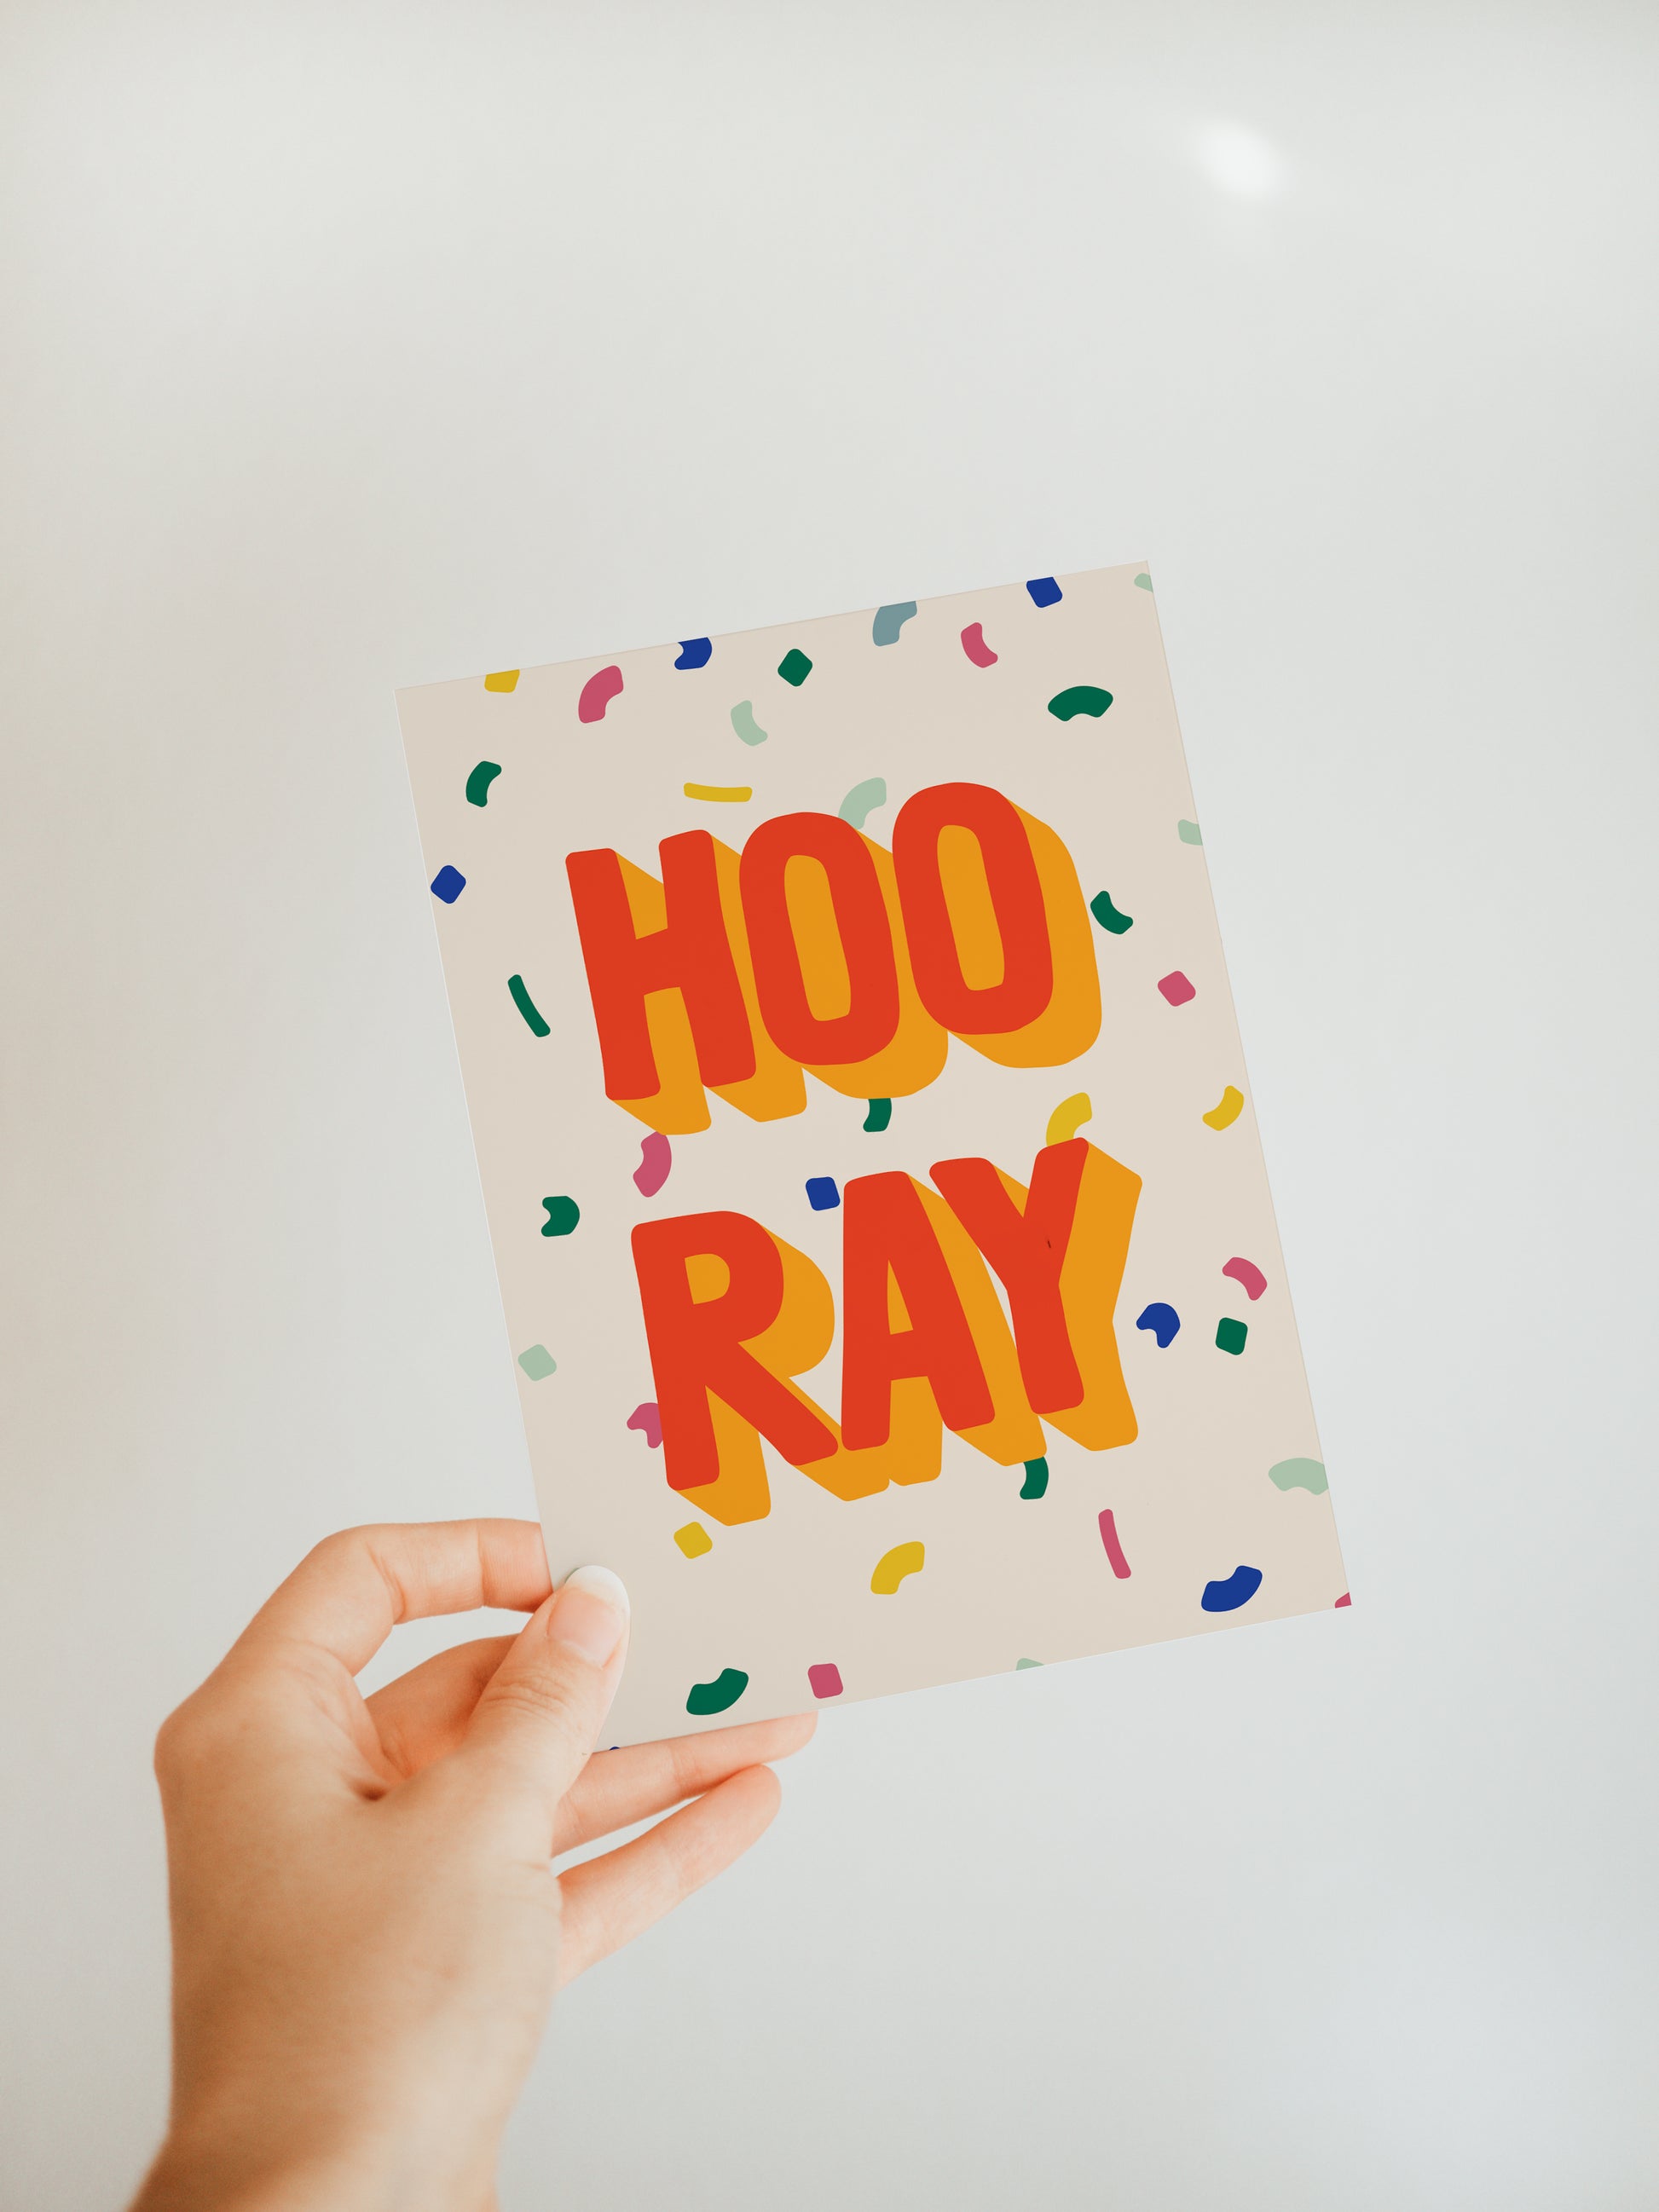 hand holding an off-white greeting card that says "hooray" with a colorful confetti background